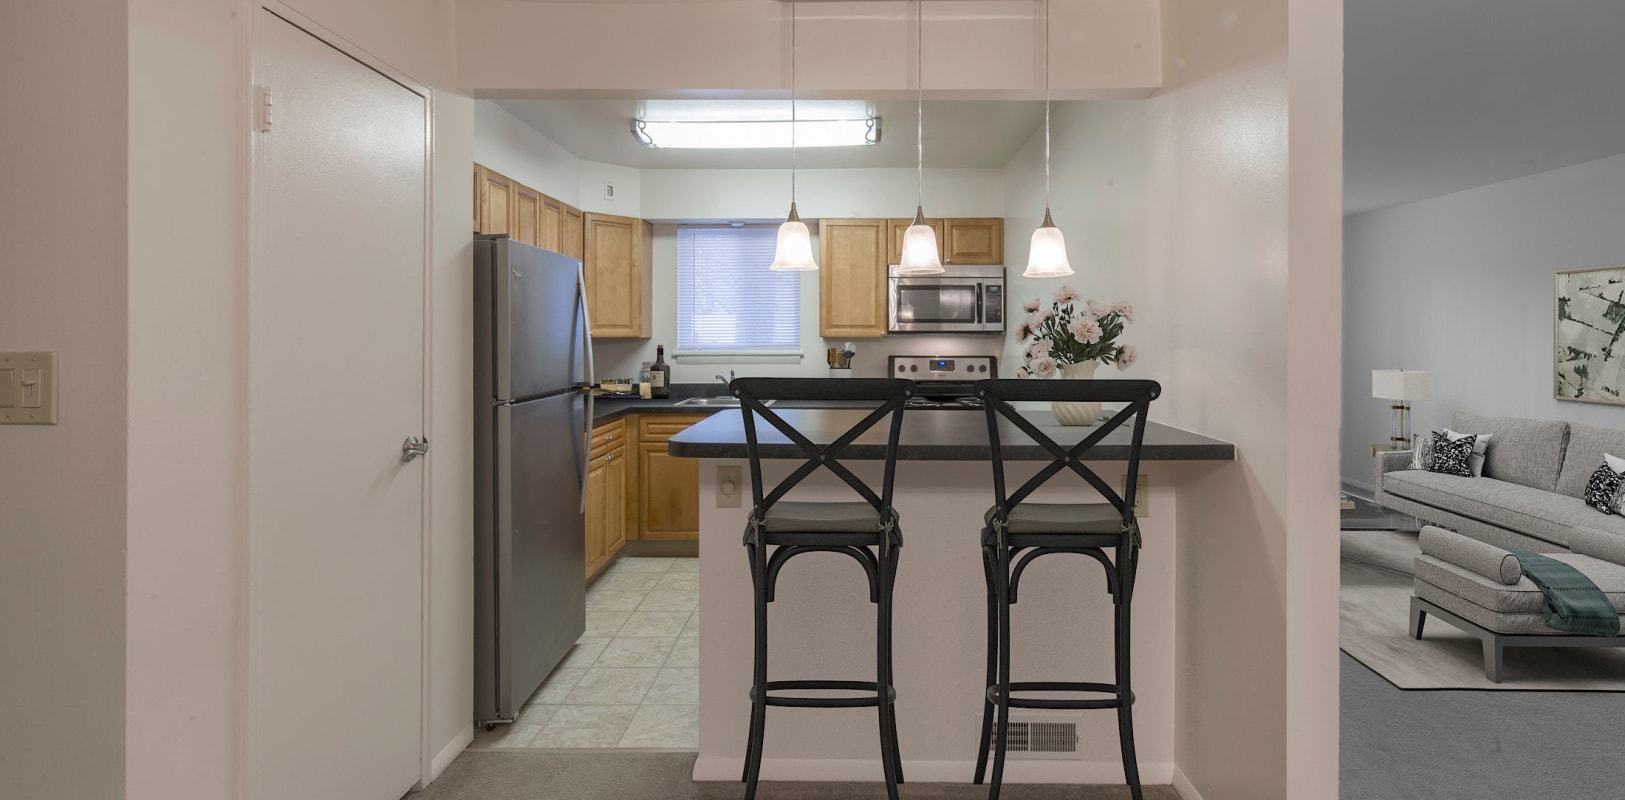 Kitchen featuring breakfast bar seating at Penn Crest Apartments in Allentown, Pennsylvania